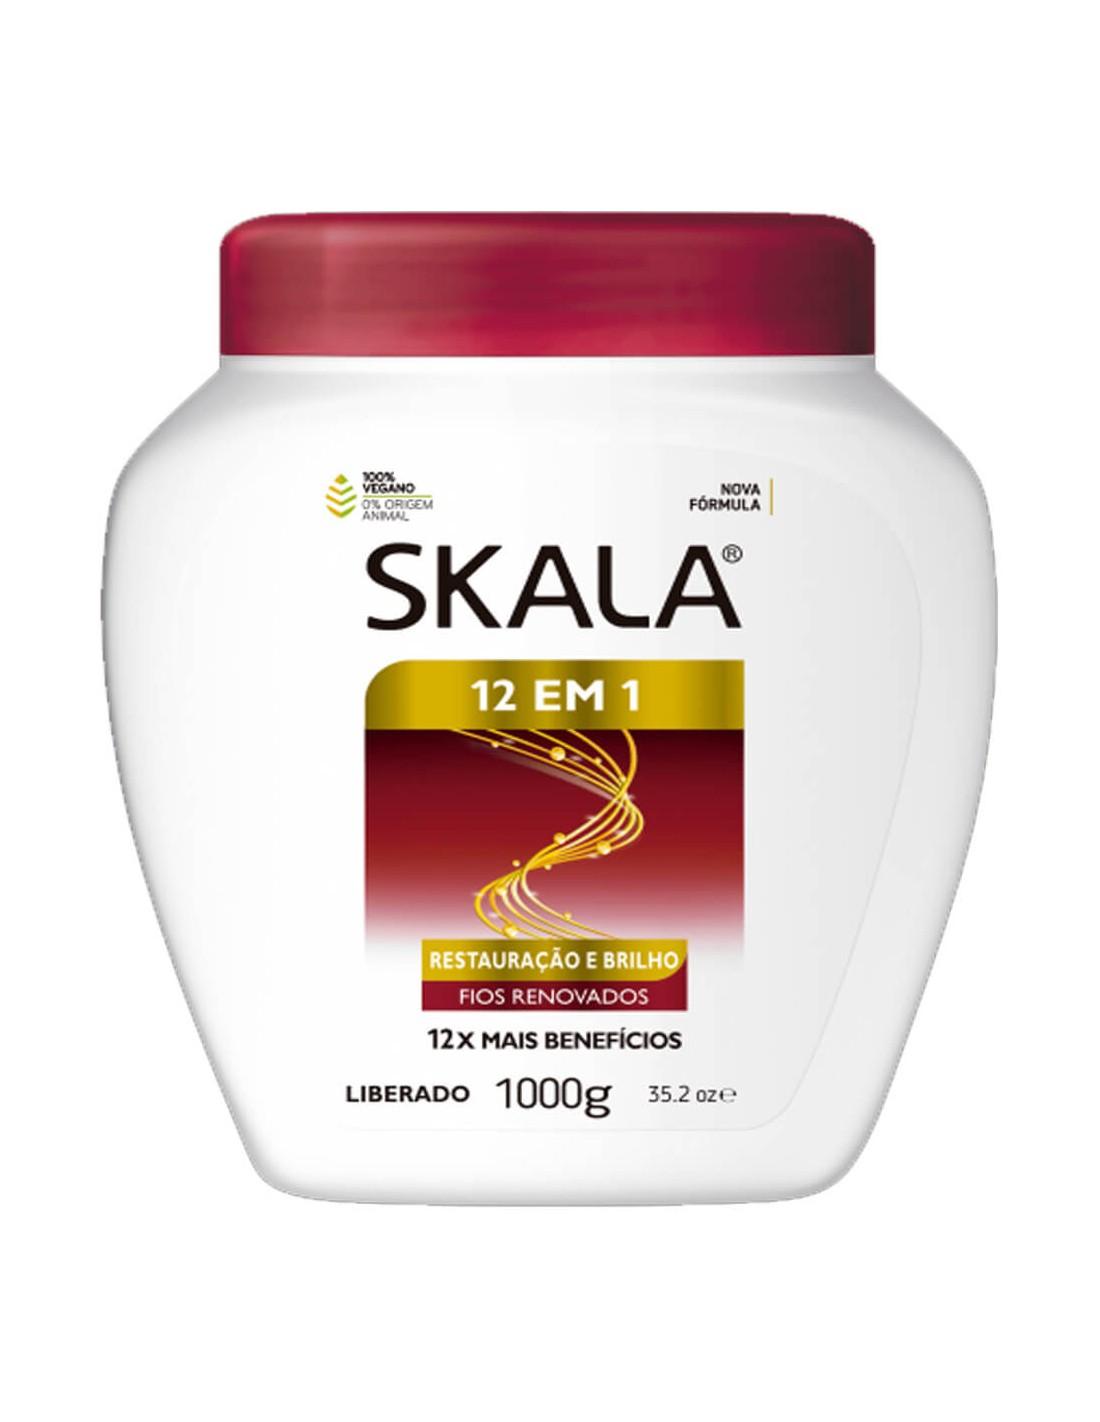 Skala 12 in 1 Hair Treatment Conditioning 1000g